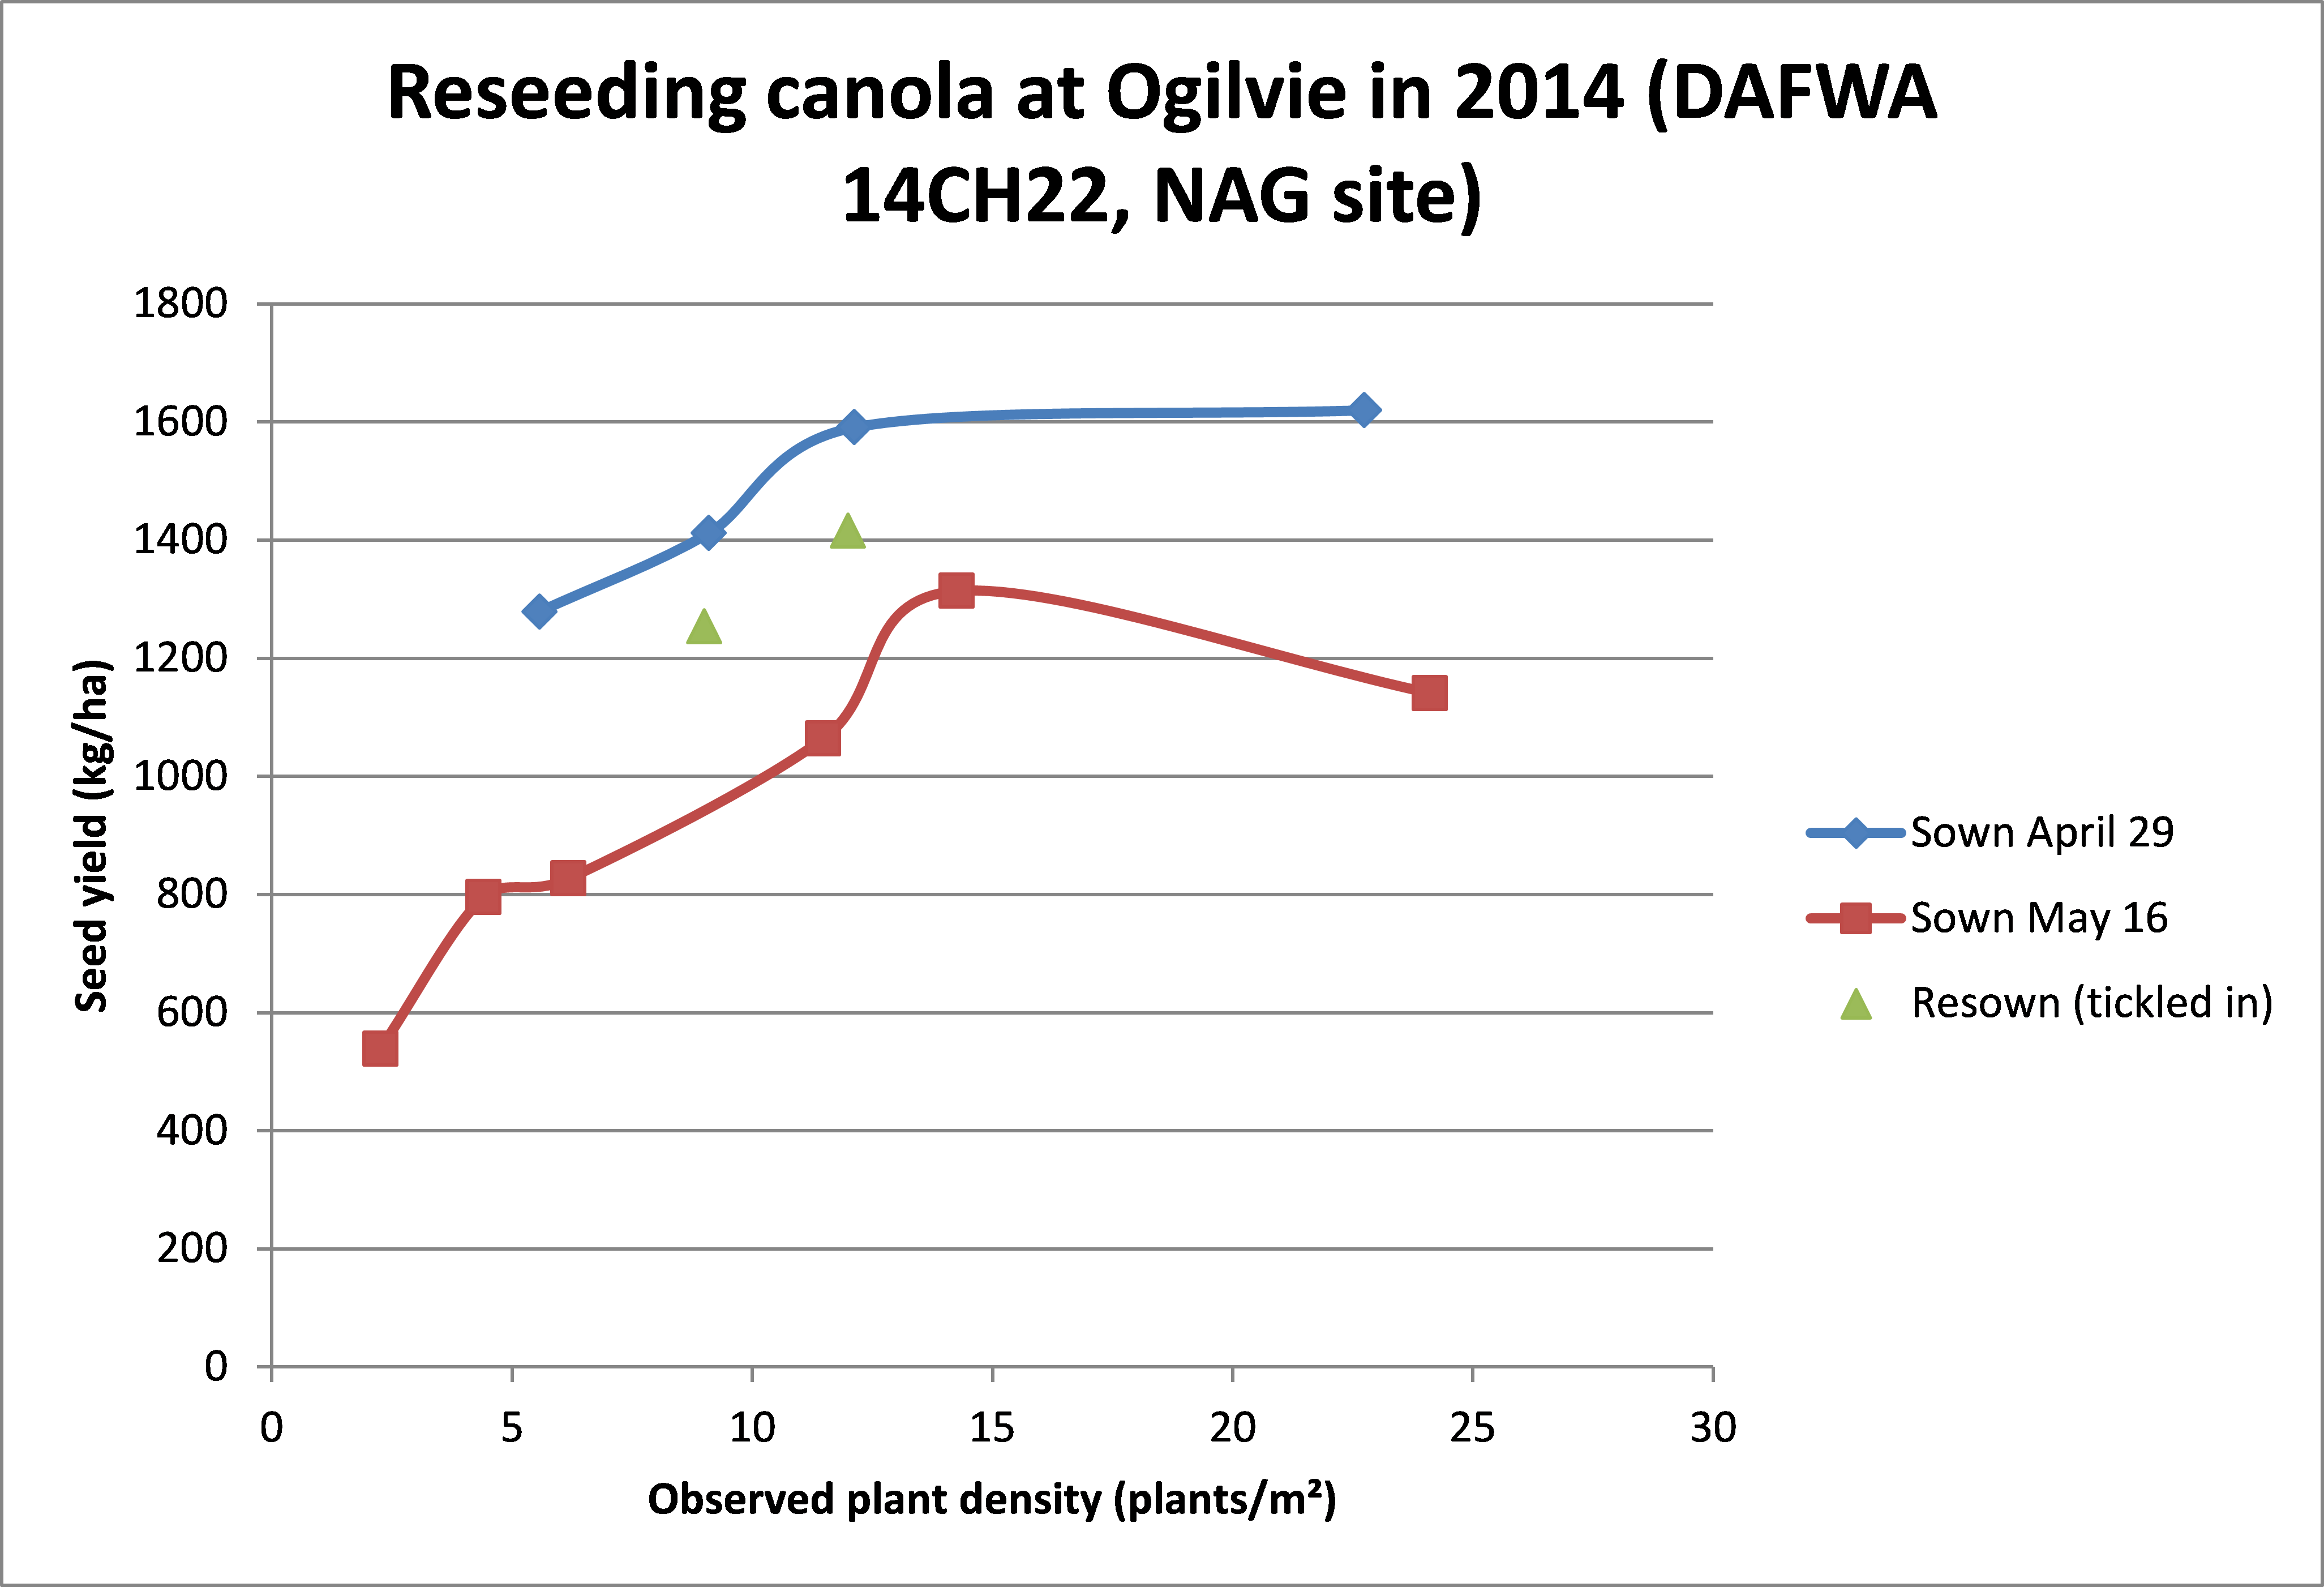 Early sown canola had higher yield than resown canola, at all plant densities.